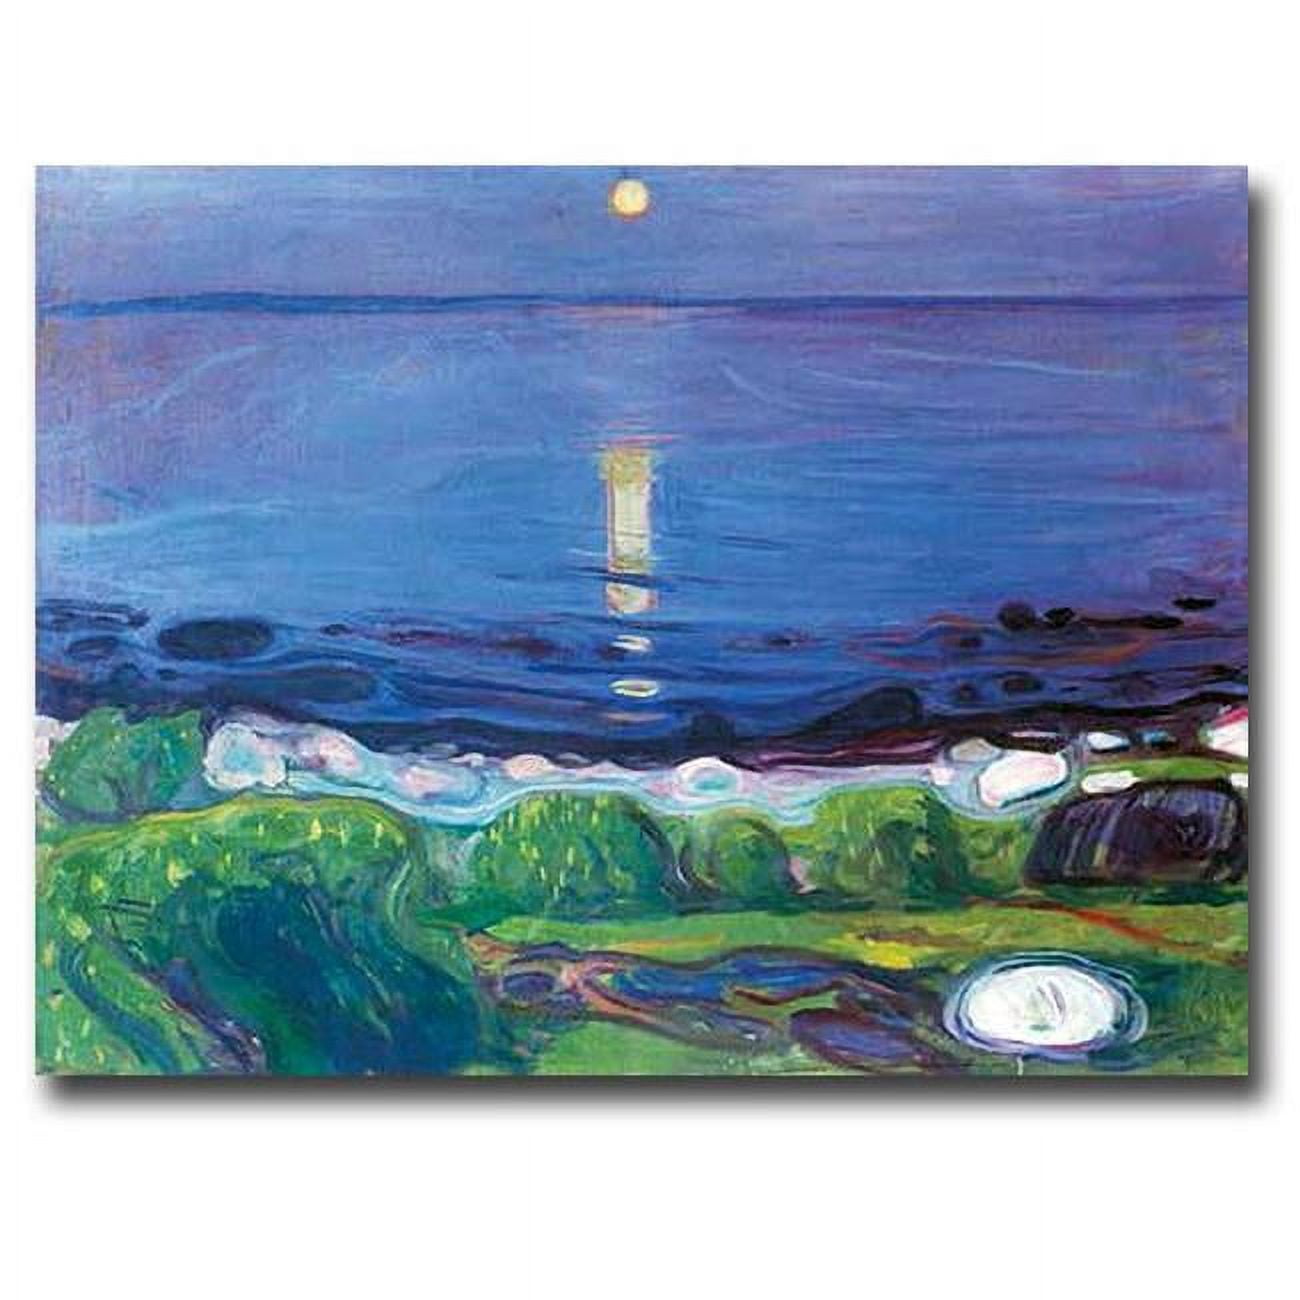 1216am558sag Seascape By Edvard Munch Premium Gallery Wrapped Canvas Giclee Art - 12 X 16 X 1.5 In.